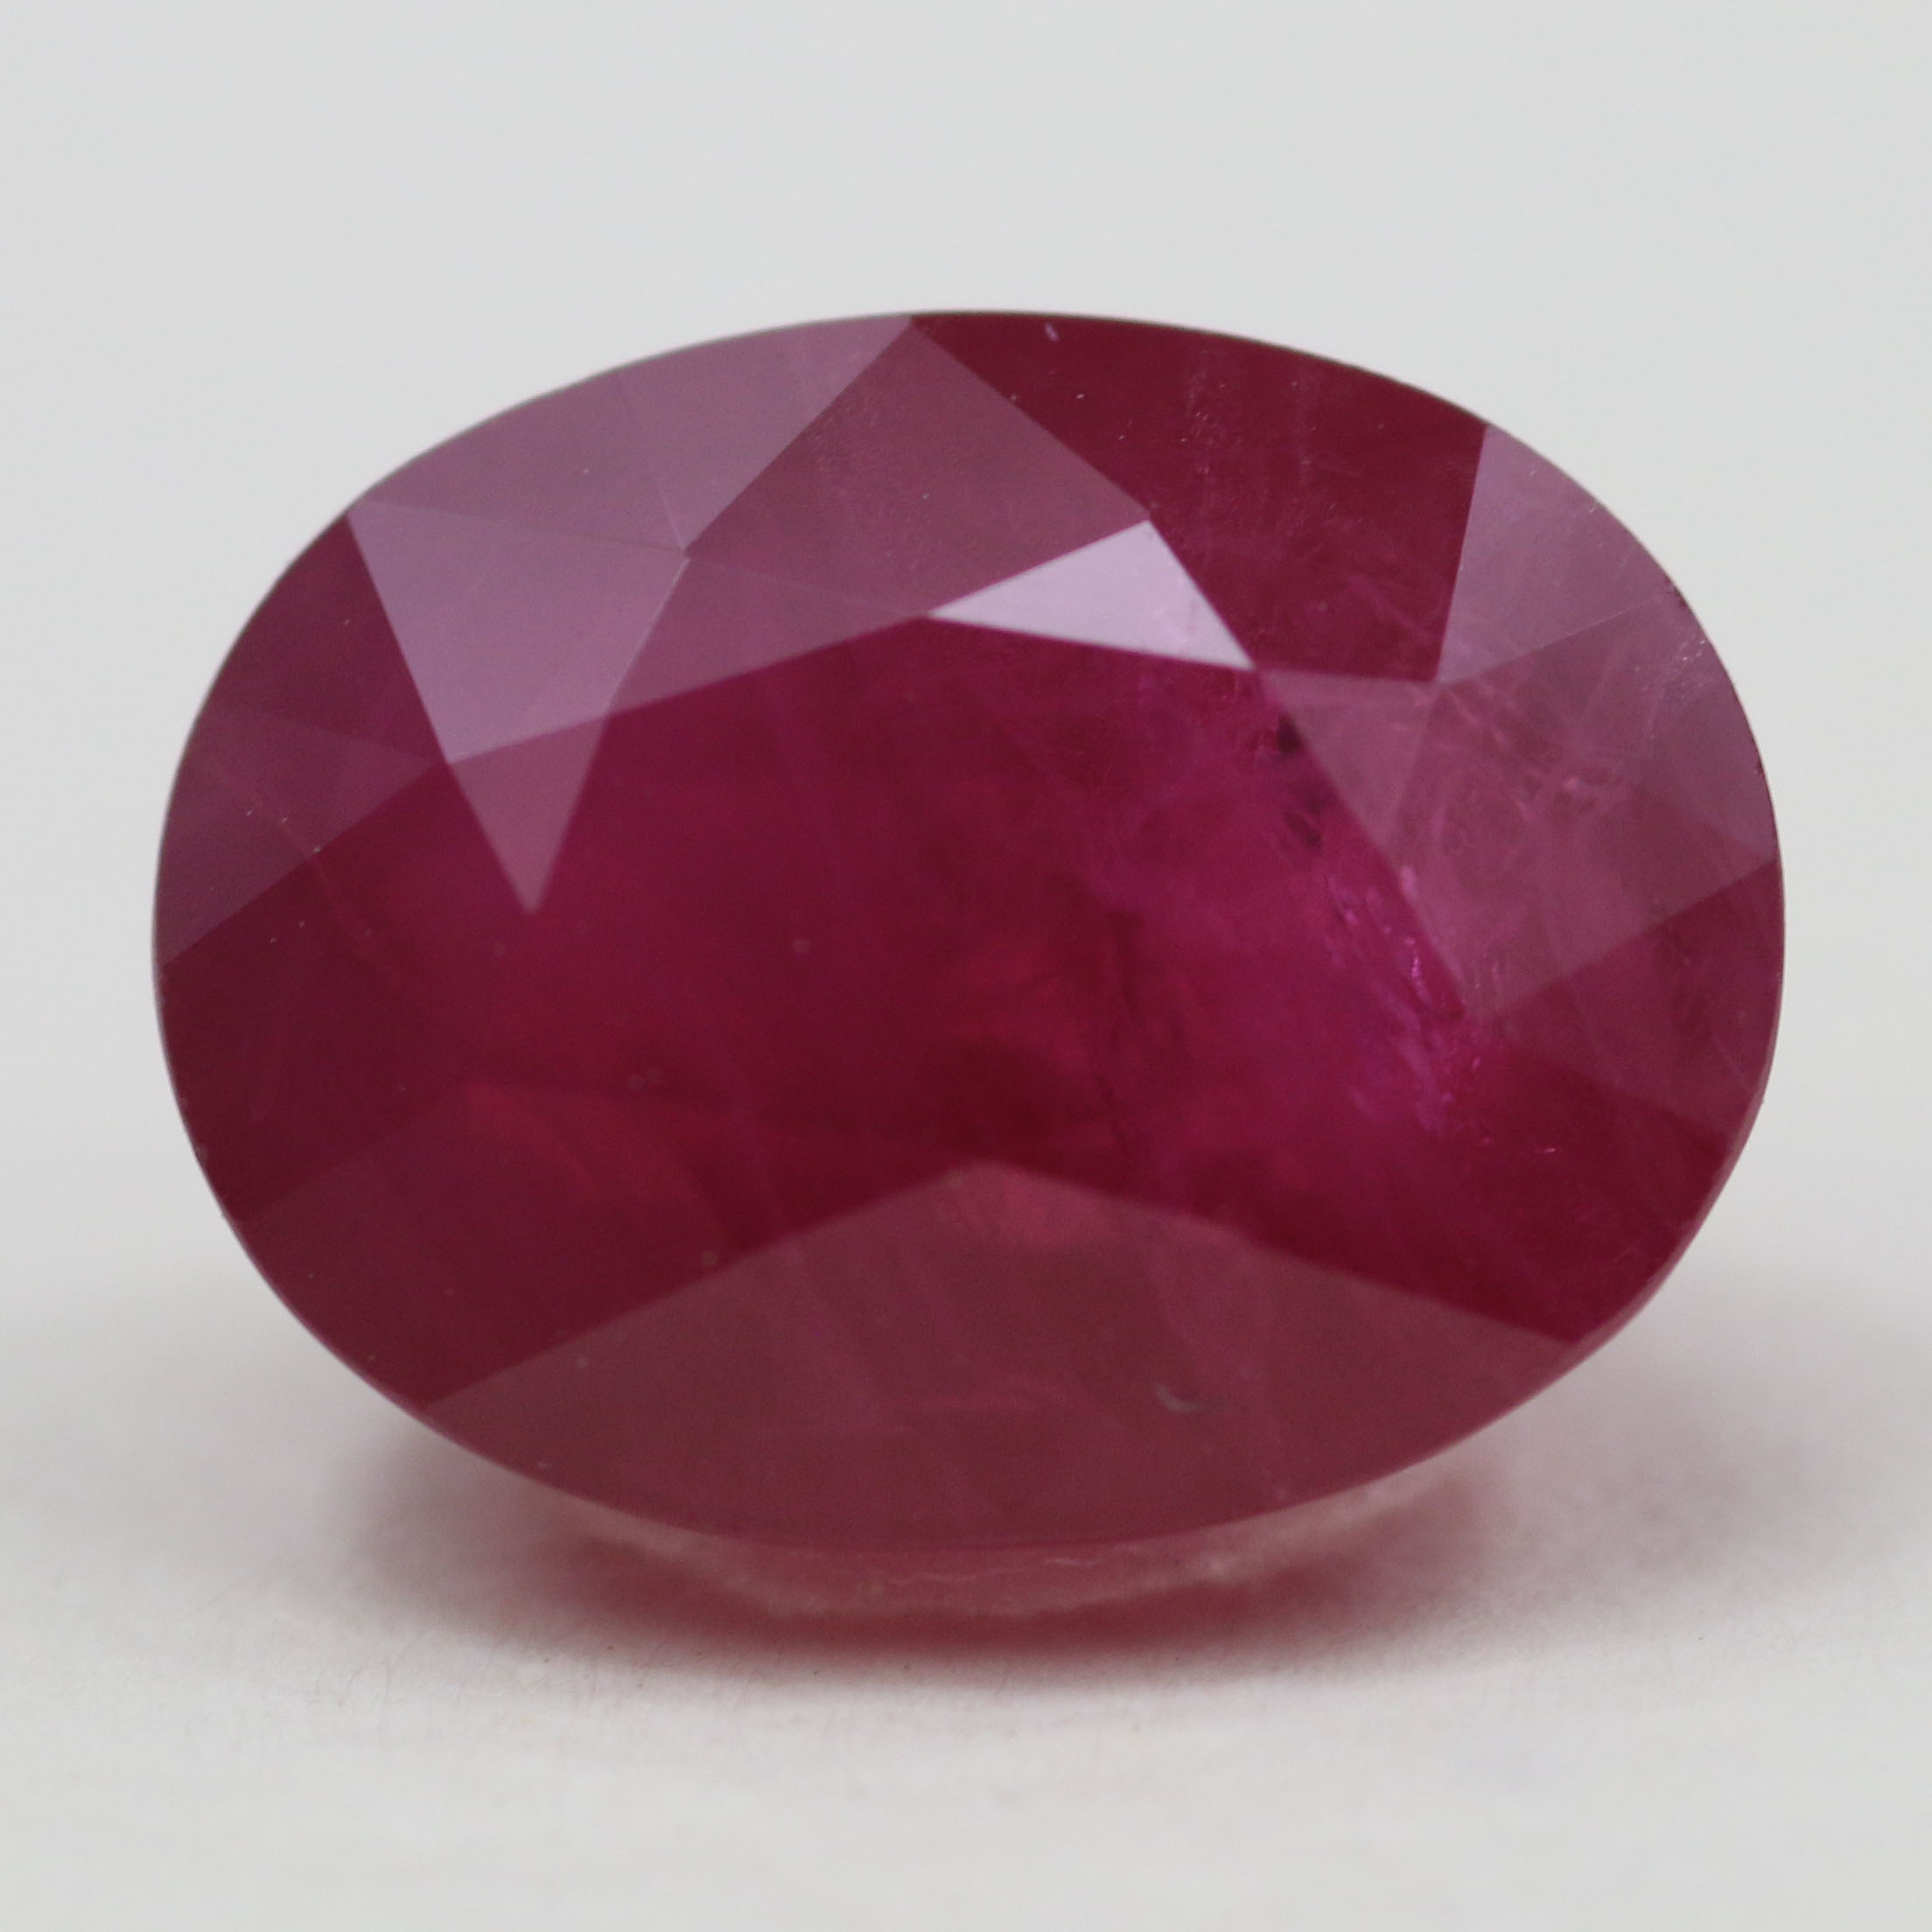 RUBY 10.2X7.9 OVAL 4.11CT